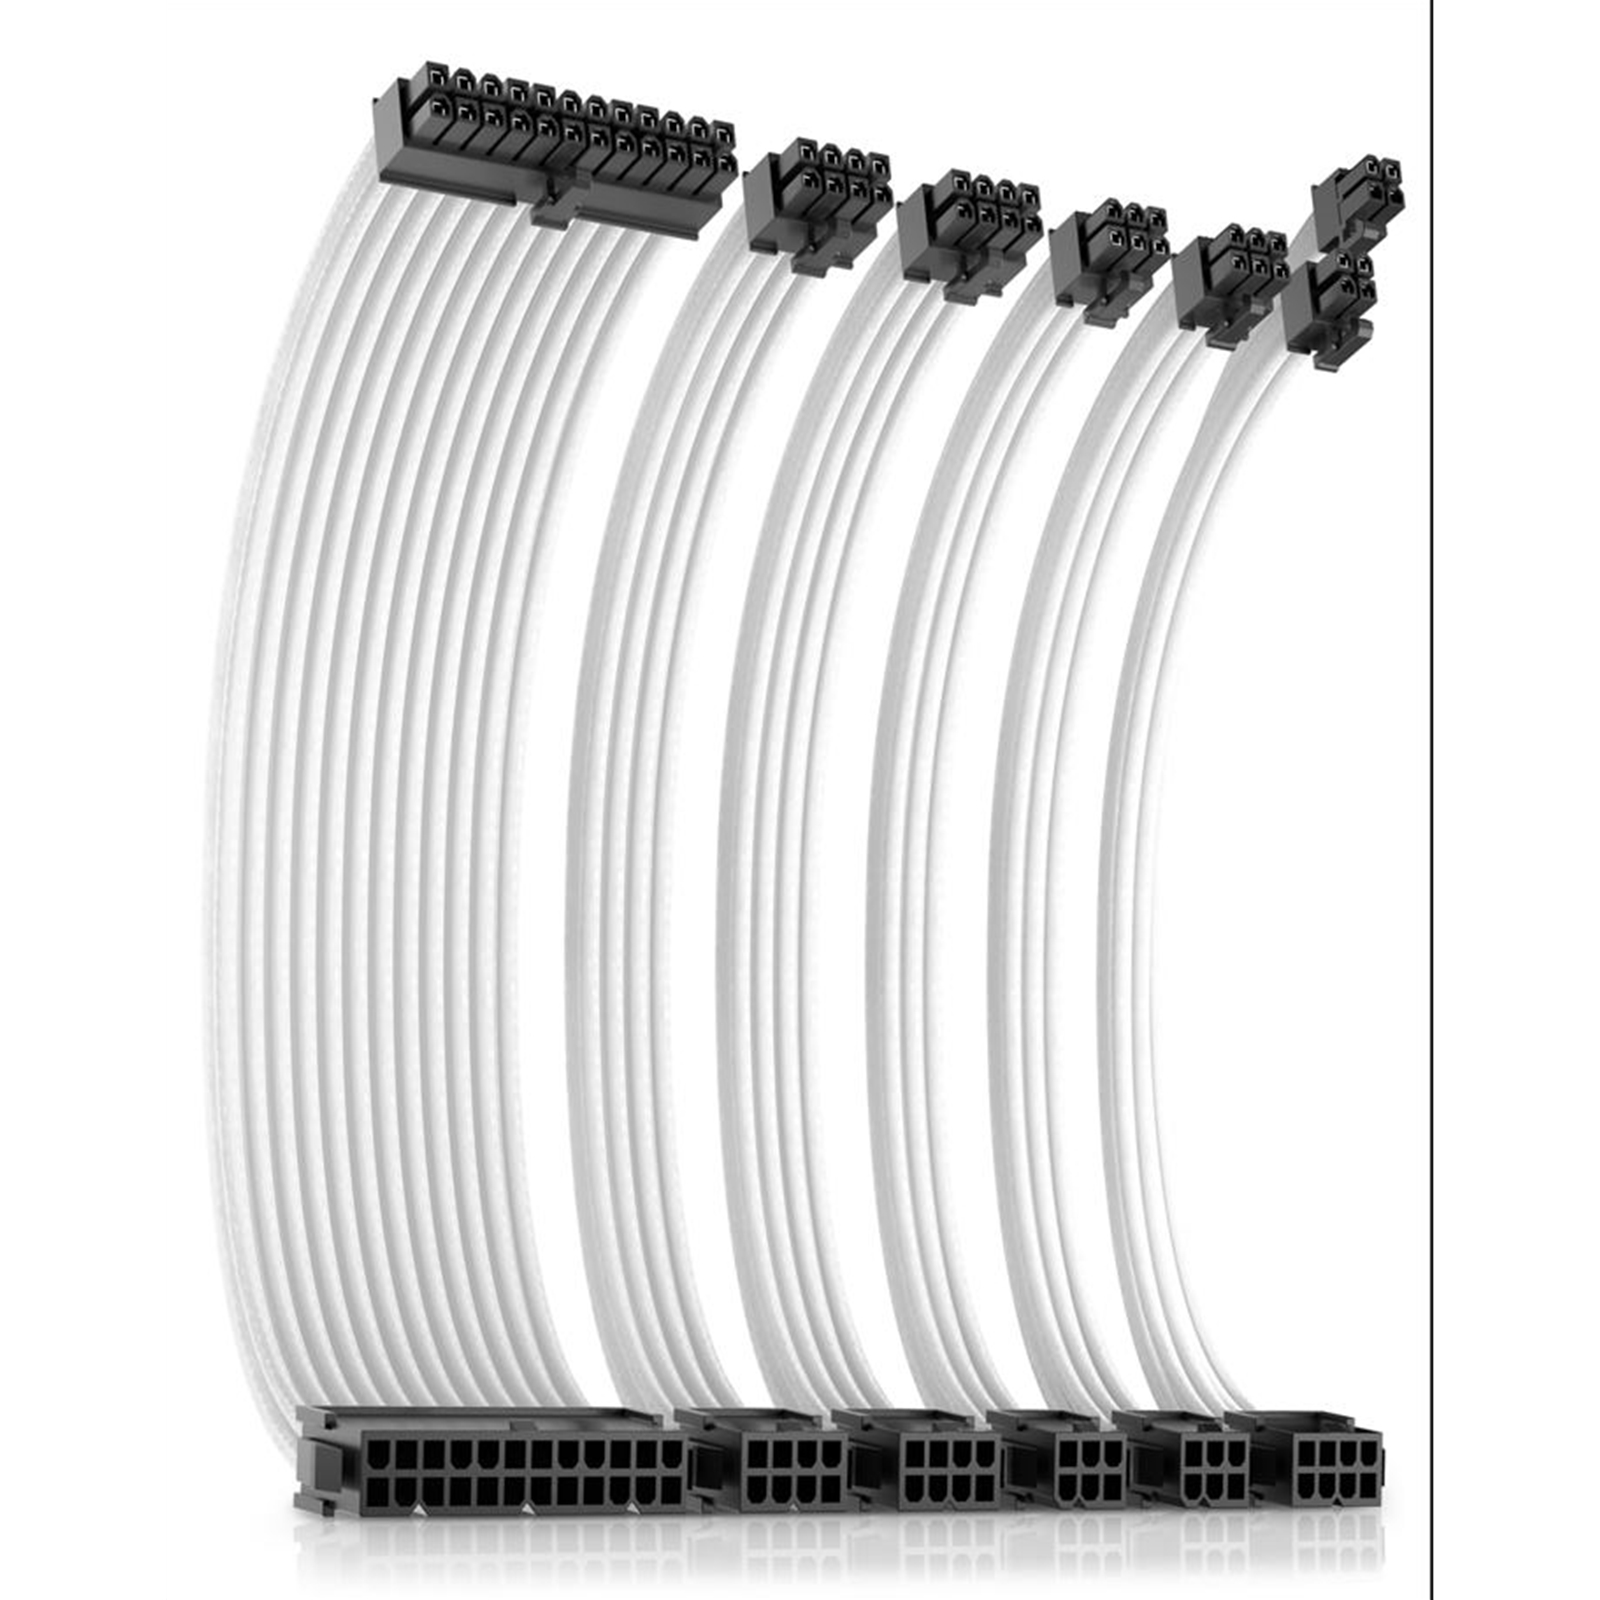 Antec White PSU Extension Cable Kit with Black Connectors - 6 Pack (1x 24 Pin, 1x 4+4 Pin, 2x 8 Pin, 2x 6 Pin)